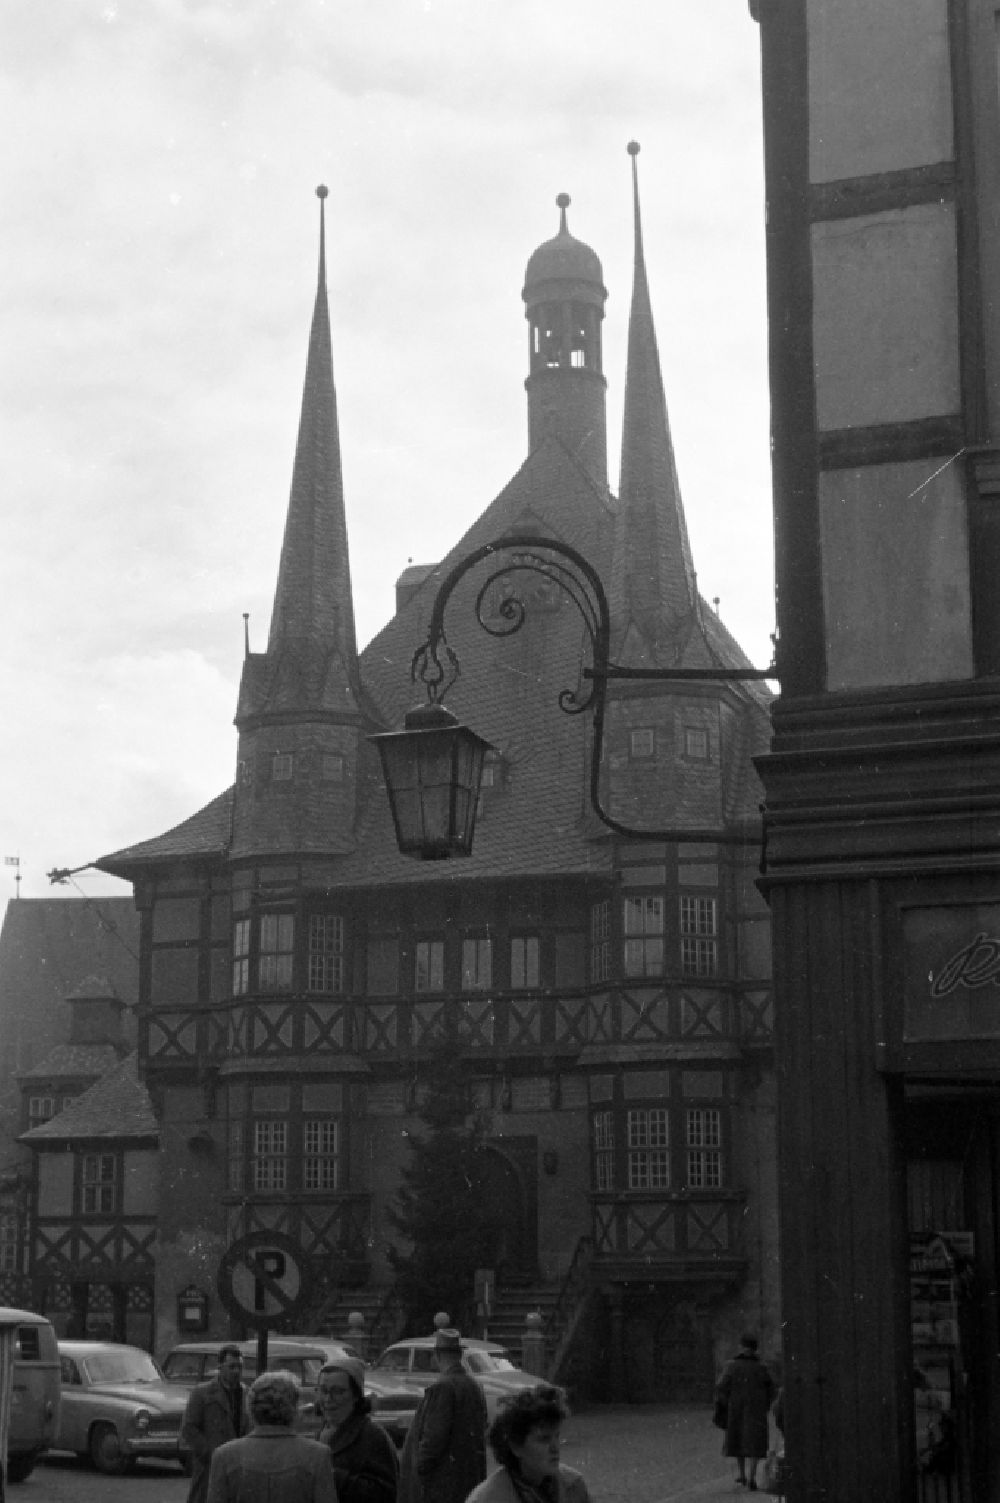 GDR image archive: Wernigerode - City Hall building on street Pfarrstrasse in Wernigerode in the Harz, Saxony-Anhalt on the territory of the former GDR, German Democratic Republic